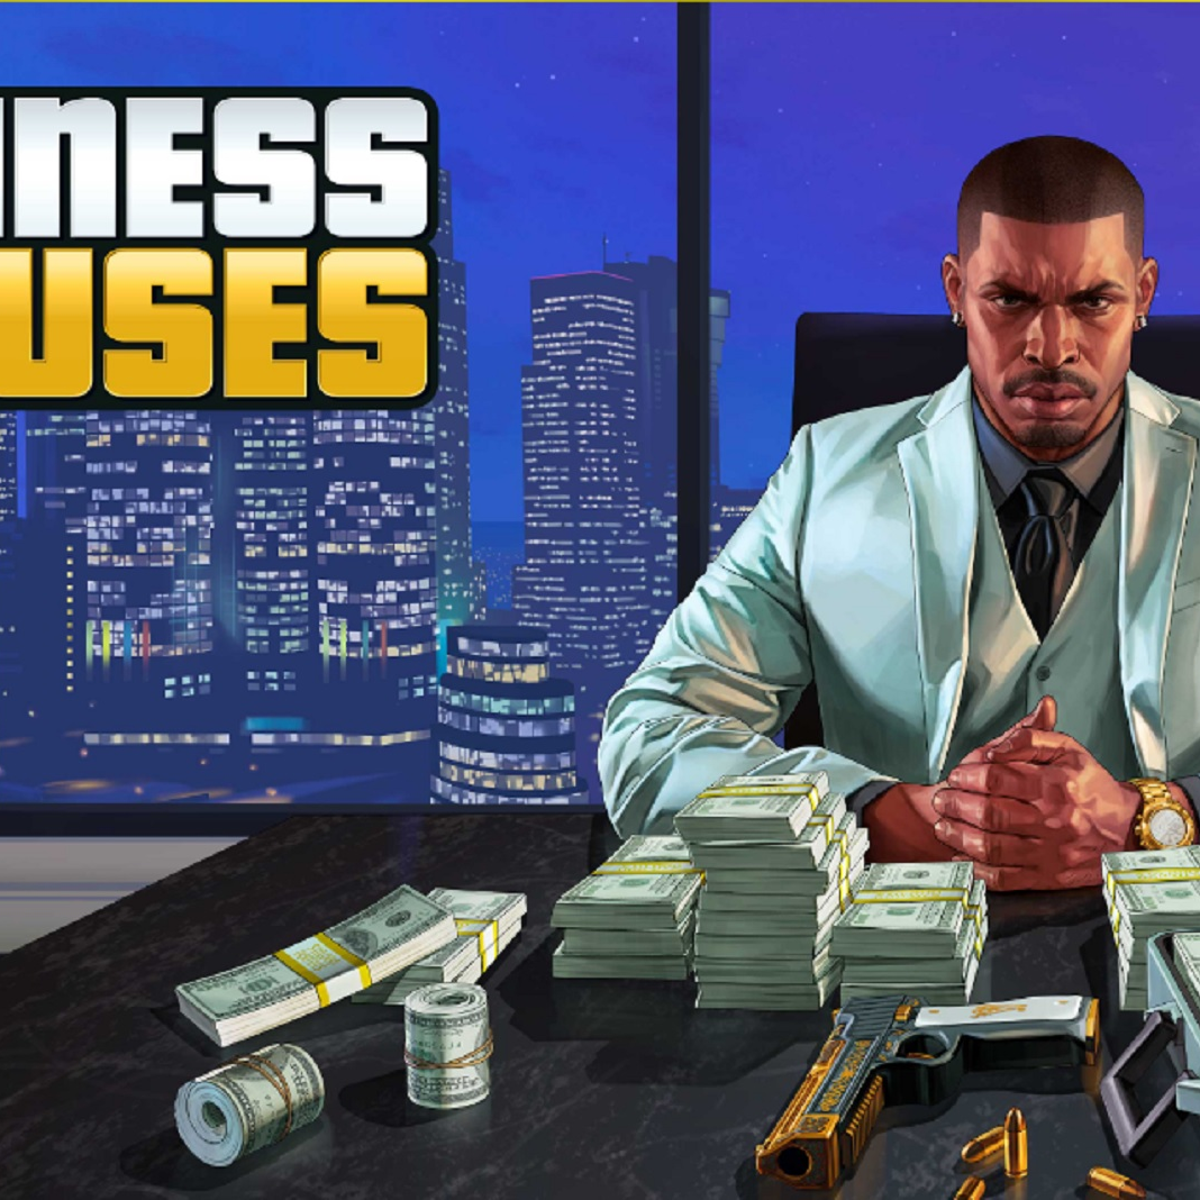 Get Your FREE $425,000 in-game Cash in Grand Theft Auto V Online –